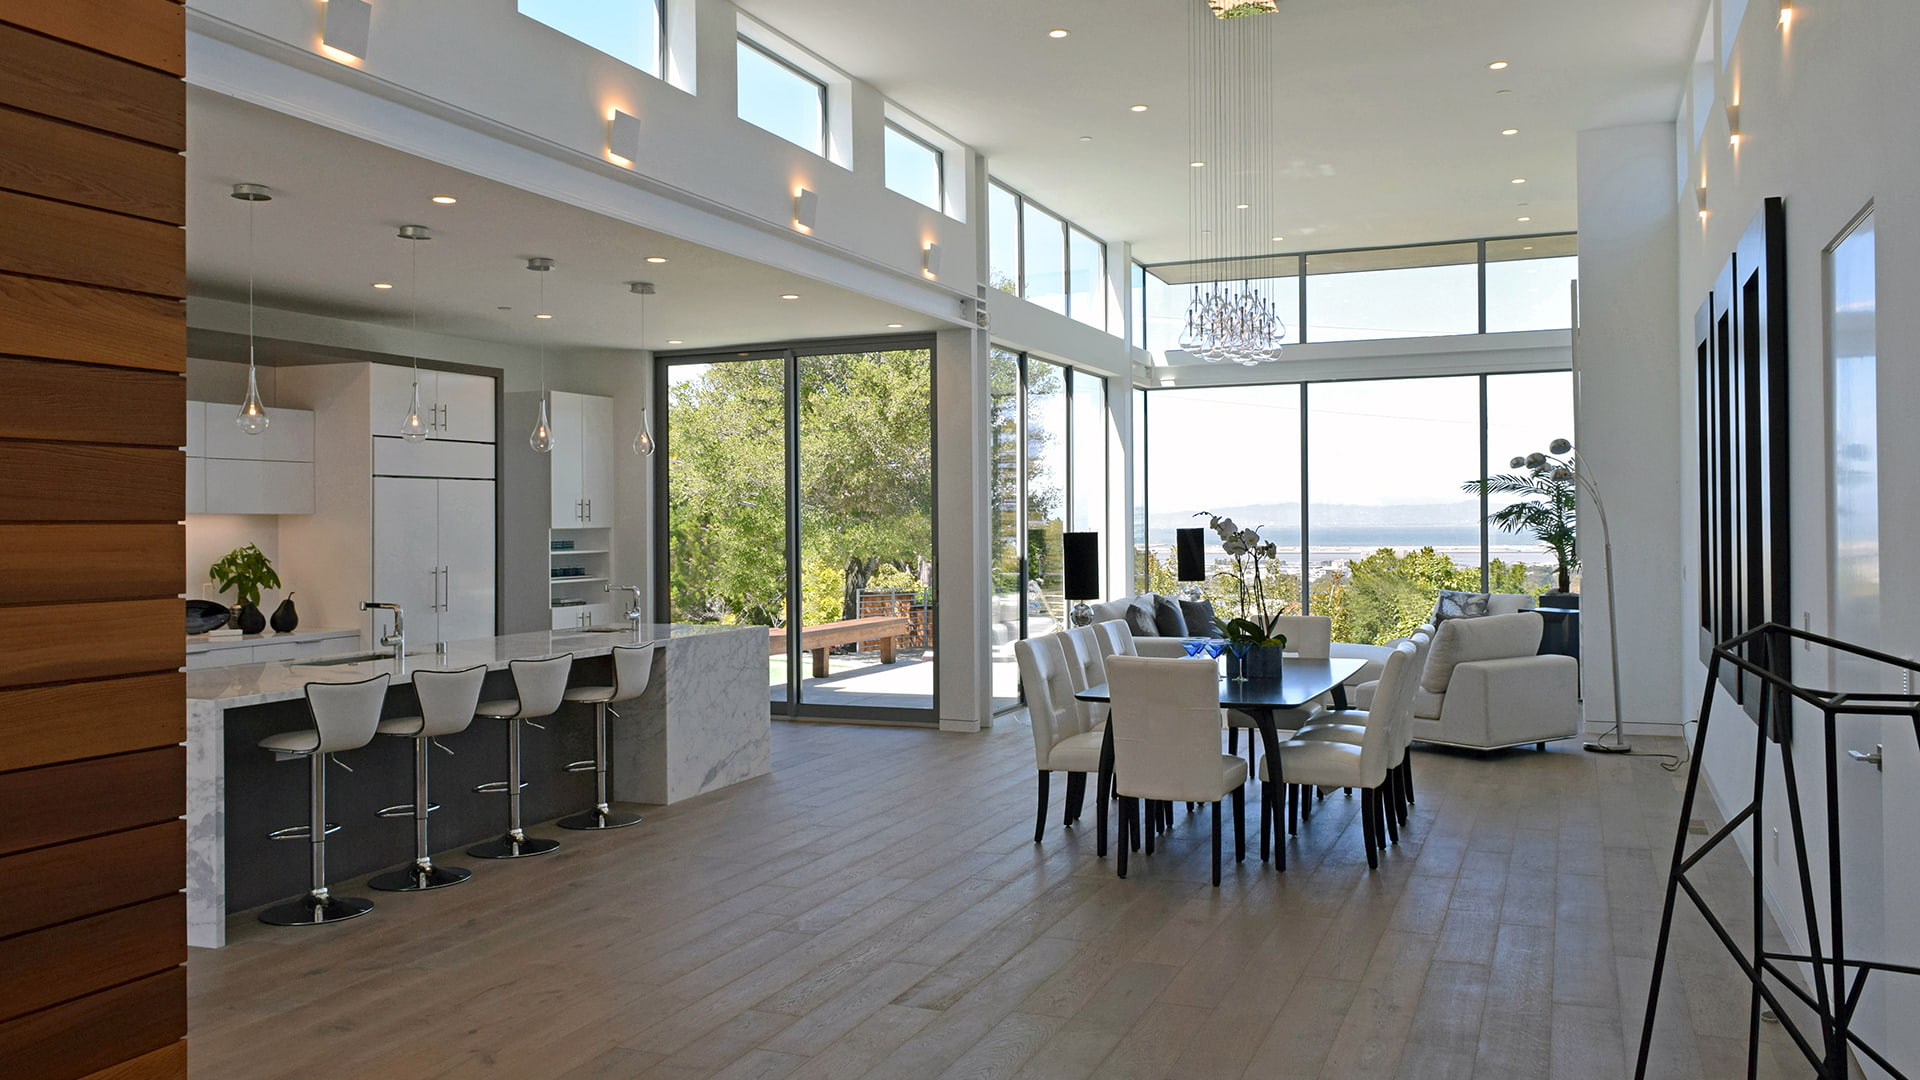 An open concept dining room and kitchen